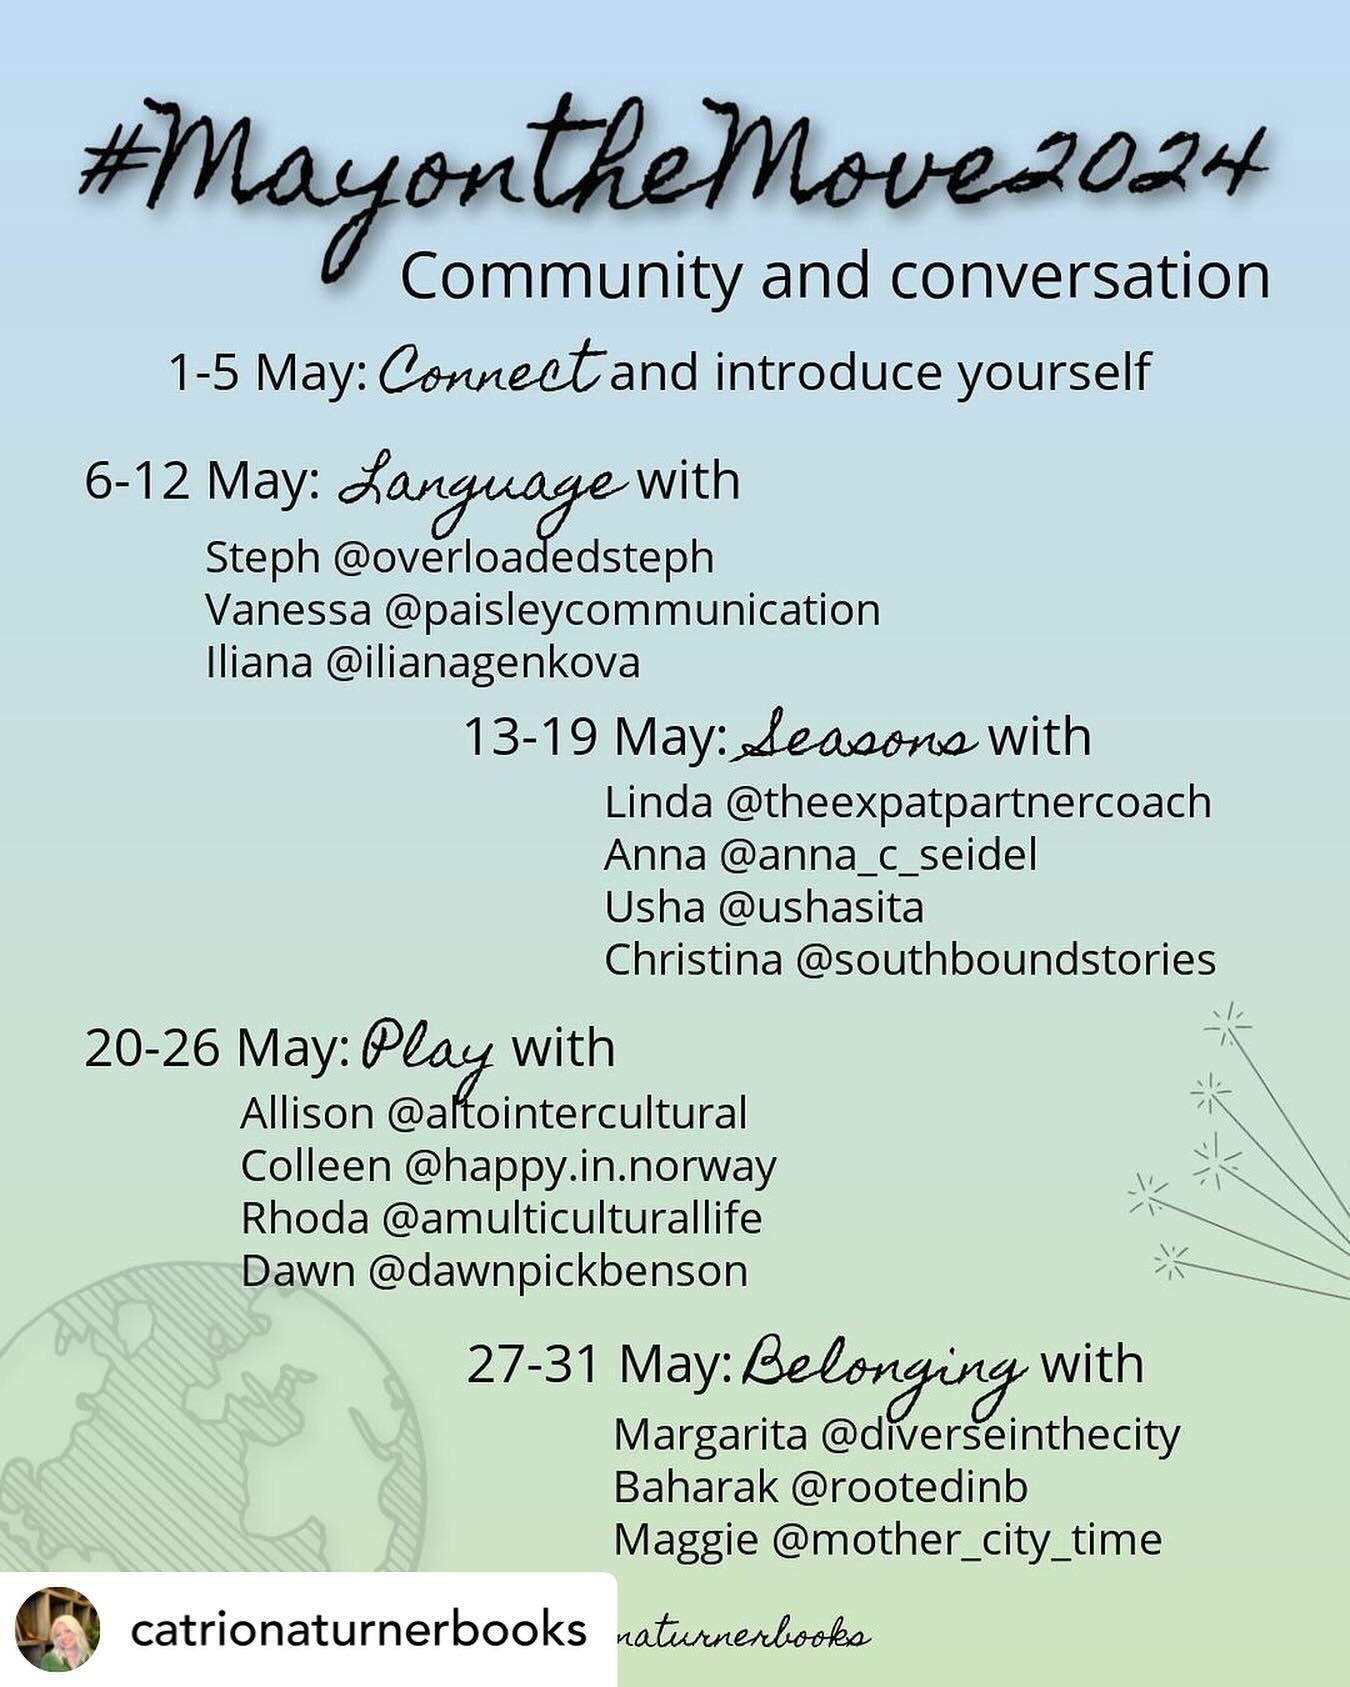 May is going to be full of connecting, sharing and belonging! 

Join us (follow.like.comment.post) at any point in time. We would love to hear from you!

Posted @withregram &bull; @catrionaturnerbooks 

With two days to go, here are the smart, though